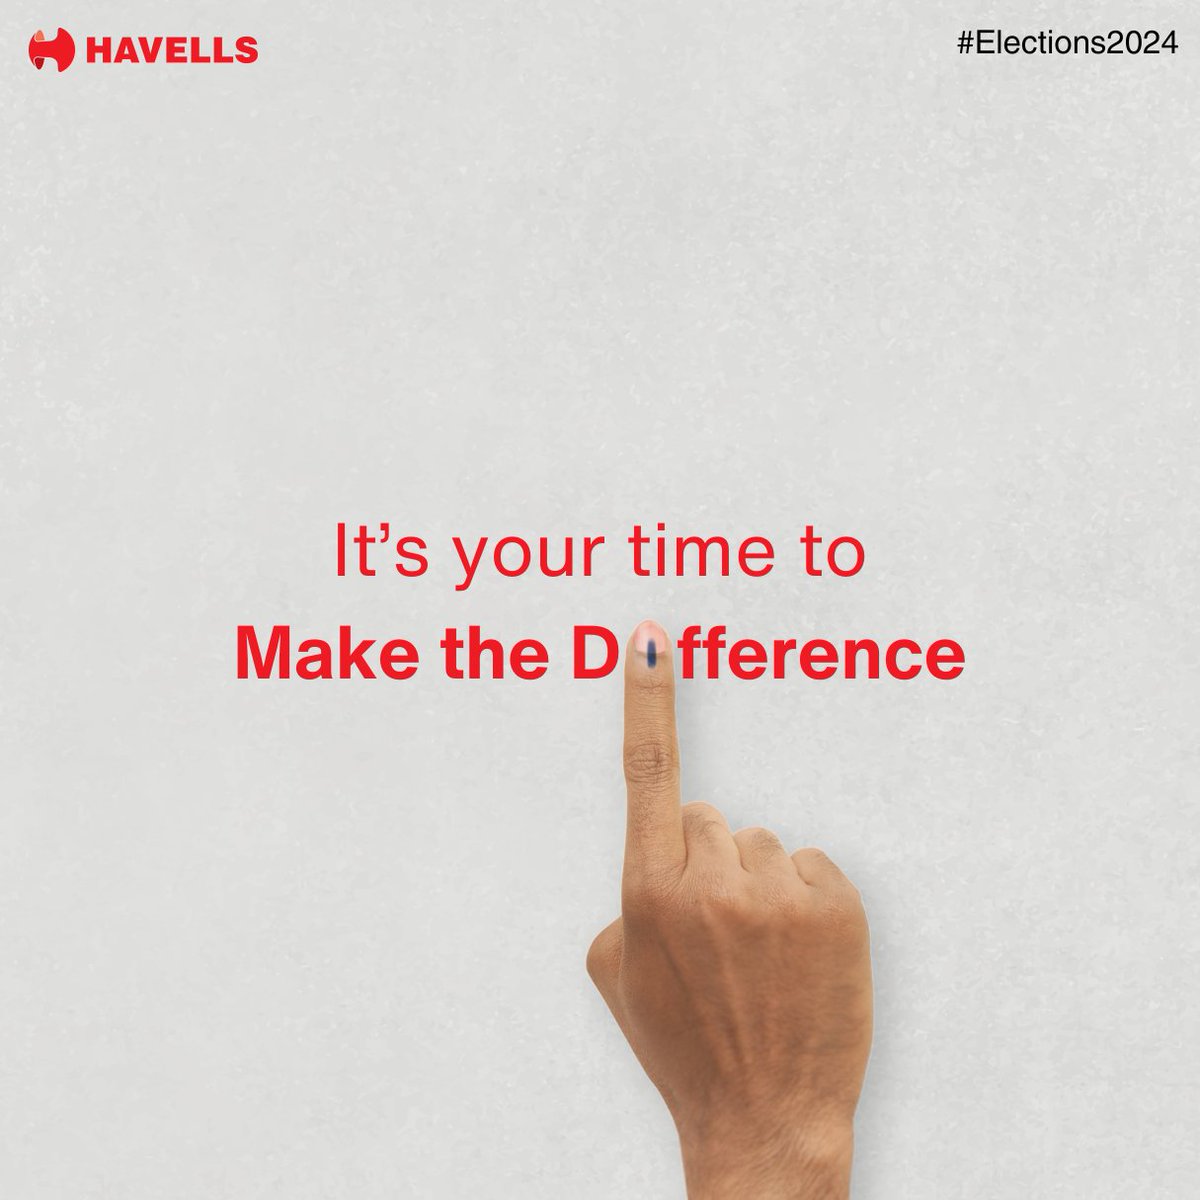 Empower change with your vote. It’s our time to make a difference and shape the future together. #Havells #MakingADifference #Election #Election2024 #VoteForChange